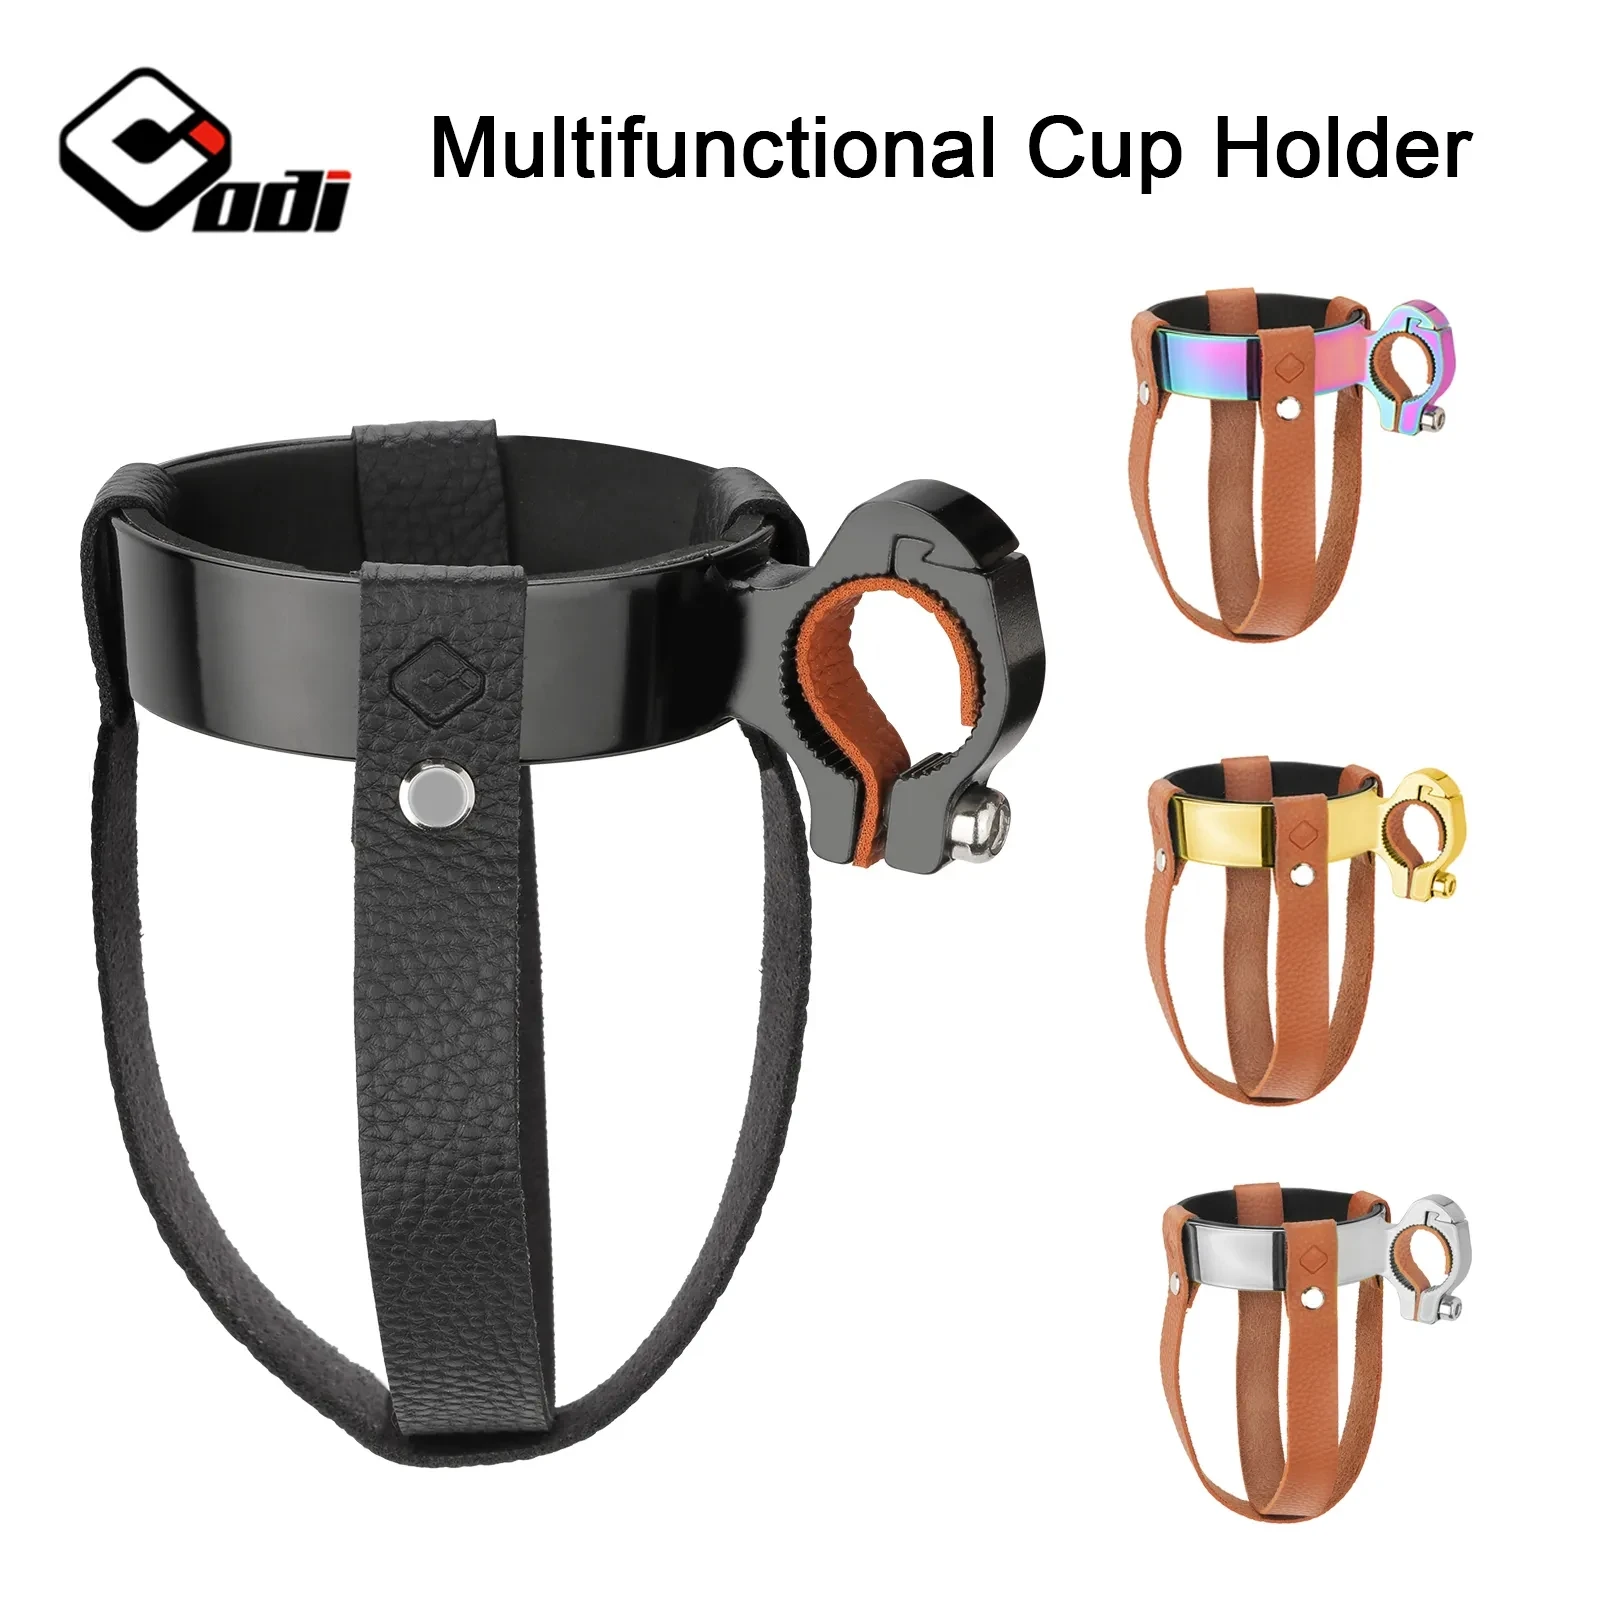 

ODI Retro Bicycle Water Bottle Cage Aluminum Alloy Coffee Cup Holder Multifunctional EquipmentCup Holder for Motorbike Cycling